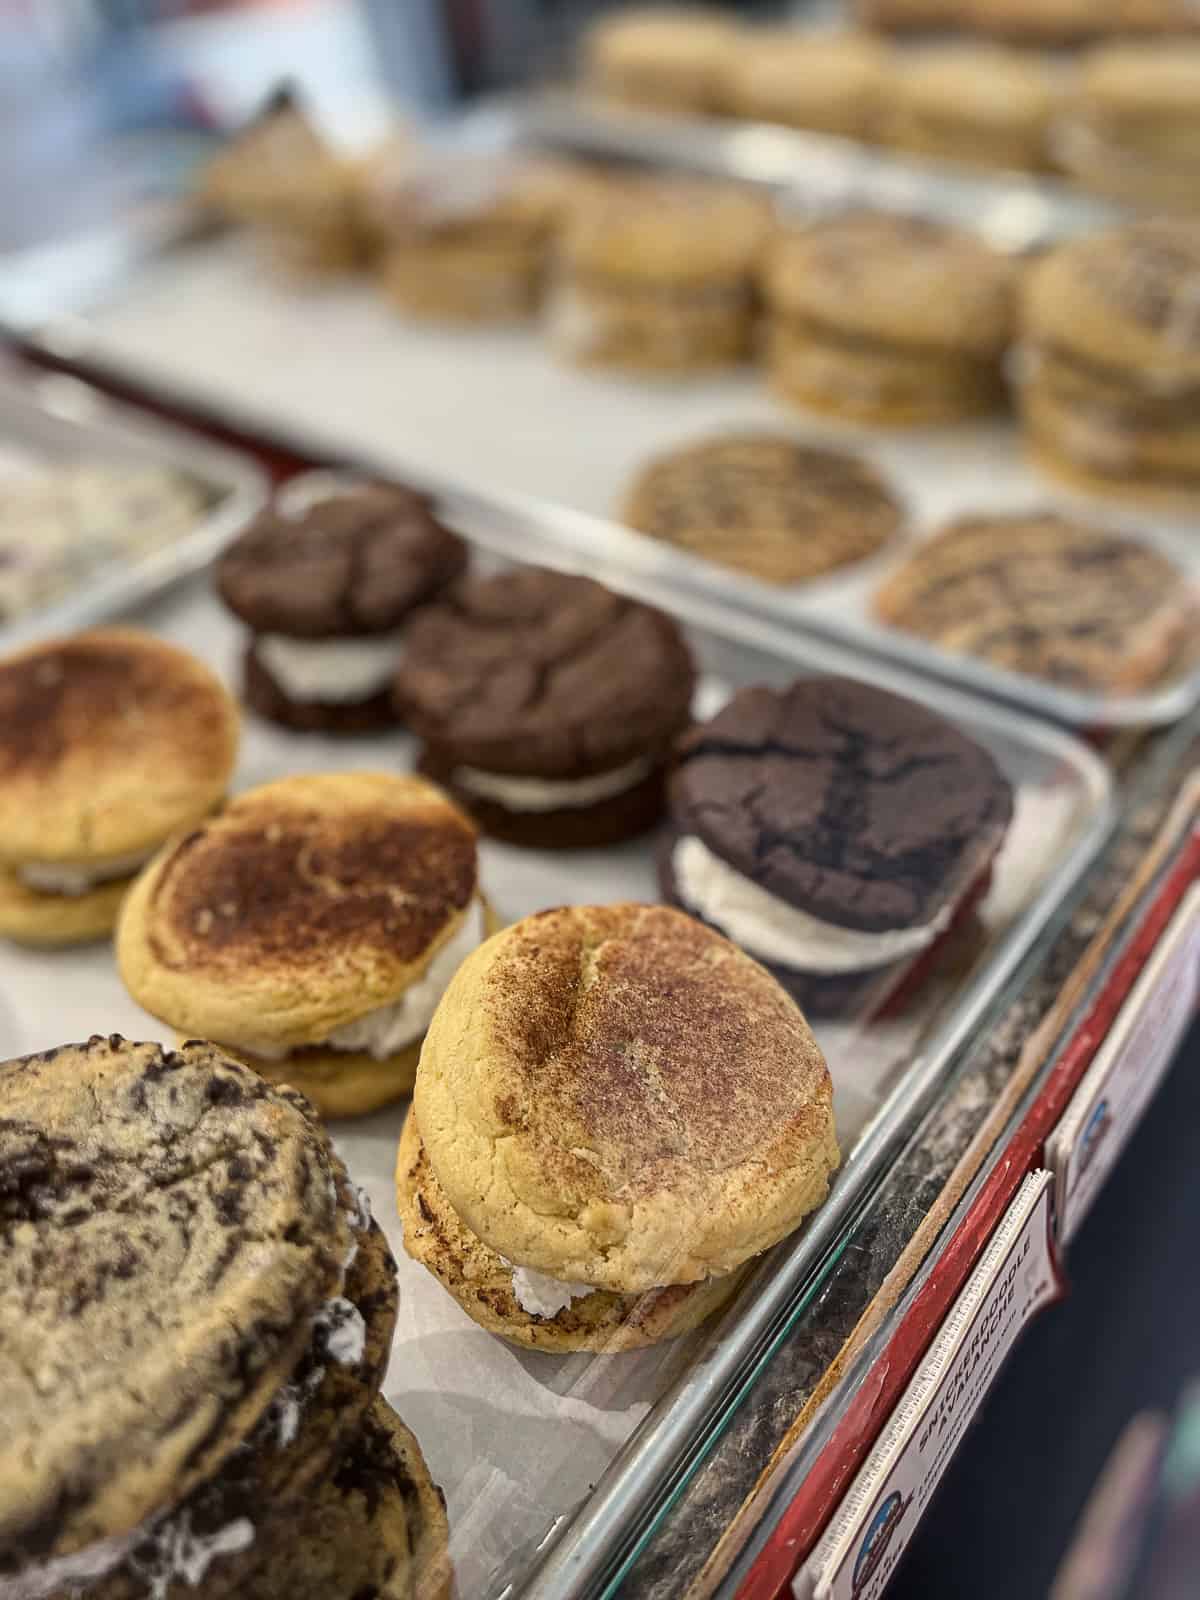 Mary's Mountain Cookie Shop in Downtown McKinney